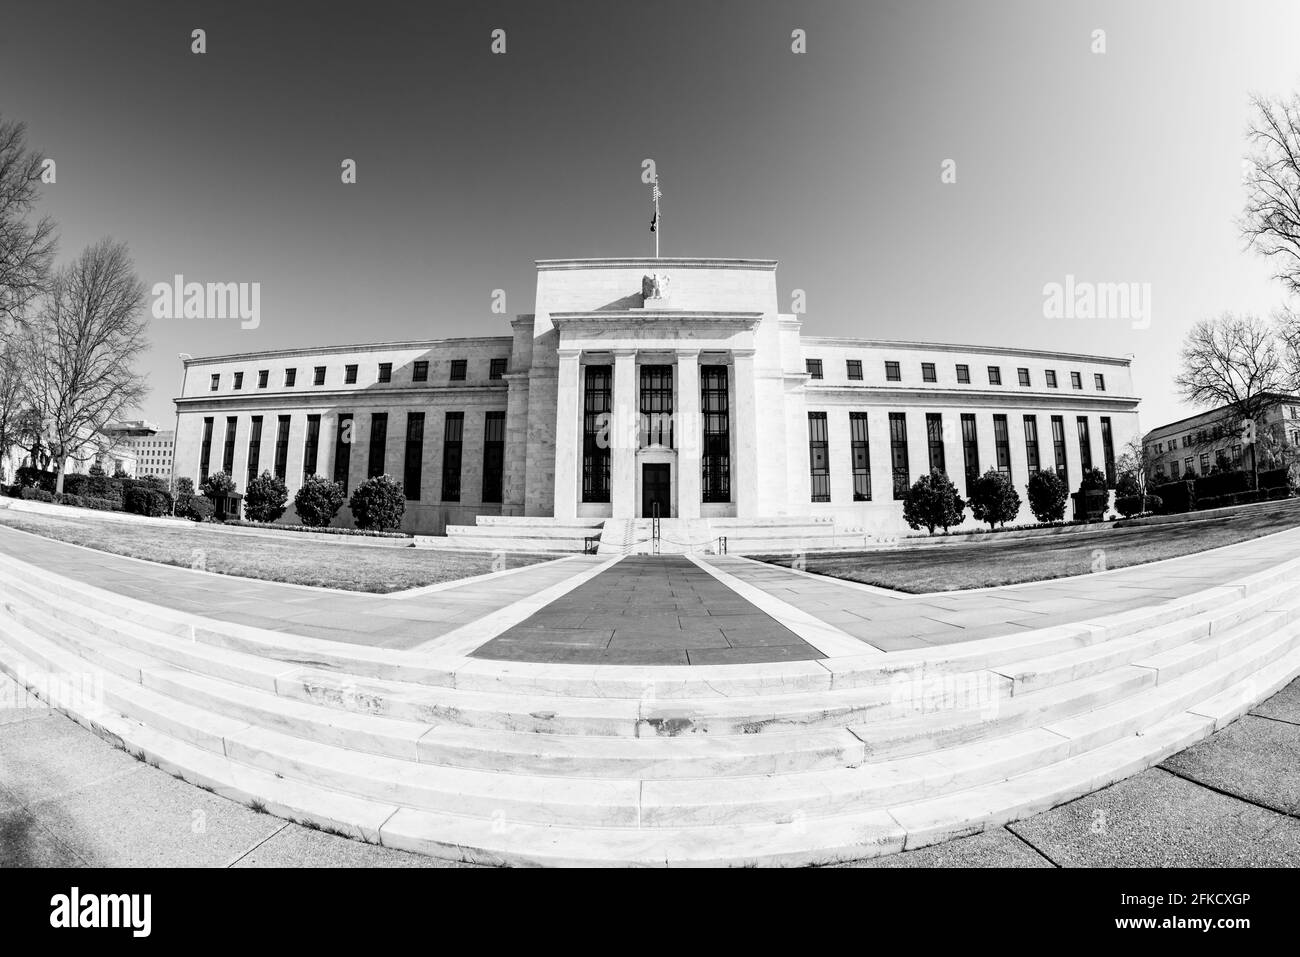 WASHINGTON, DC - Wide-angle photo of the national headquarters of the US Federal Reserve System housed in the Eccles Building on Constitution Avenue in Washington DC. It houses the main offices of the Board of Governors of the Federal Reserve. The Federal Reserve, or The Fed, as it is often known, is the central banking system of the United States. Established by the Federal Reserve Act in 1913, it has three key objectives for US monetary policy: maximizing employment, stabilizing prices, and moderating long-term interest rates. The building is named after Marriner S. Eccles (1890–1977), Chair Stock Photo